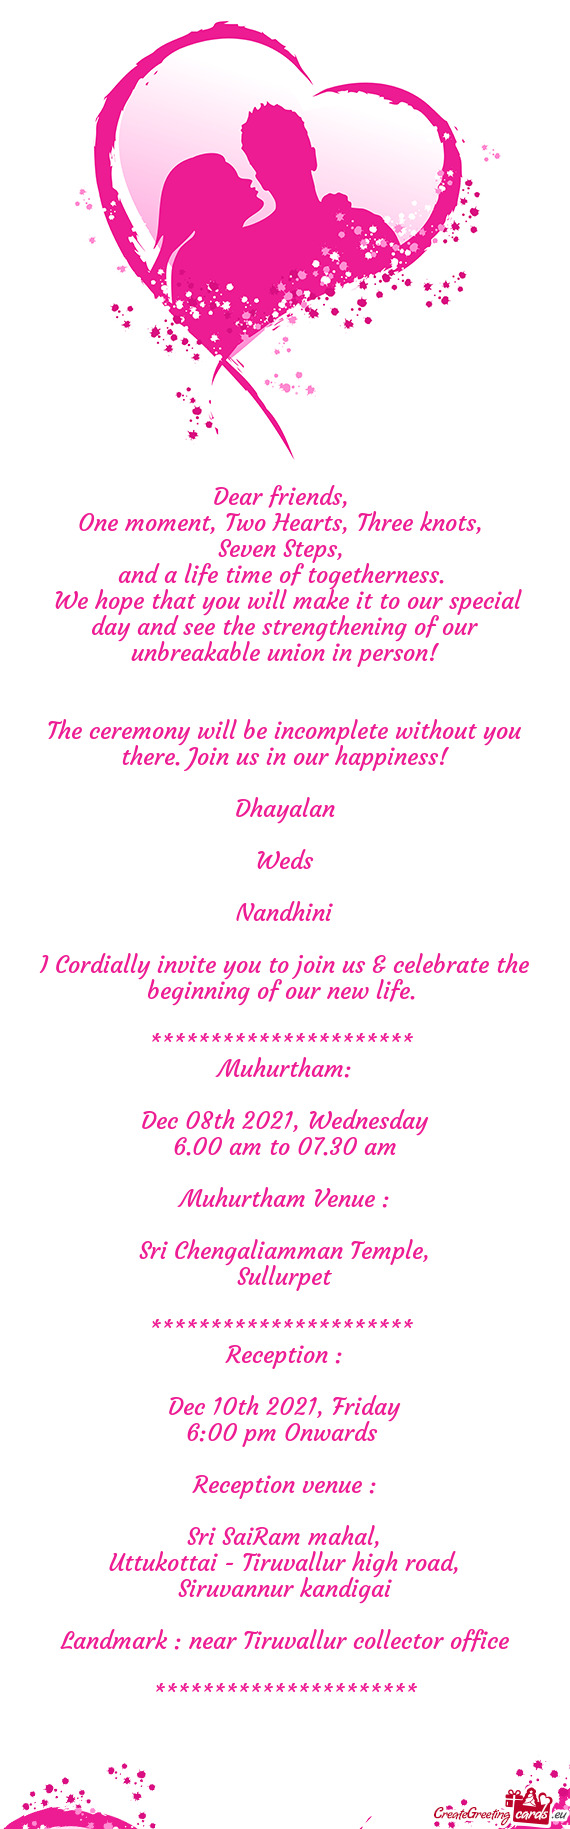 The ceremony will be incomplete without you there. Join us in our happiness